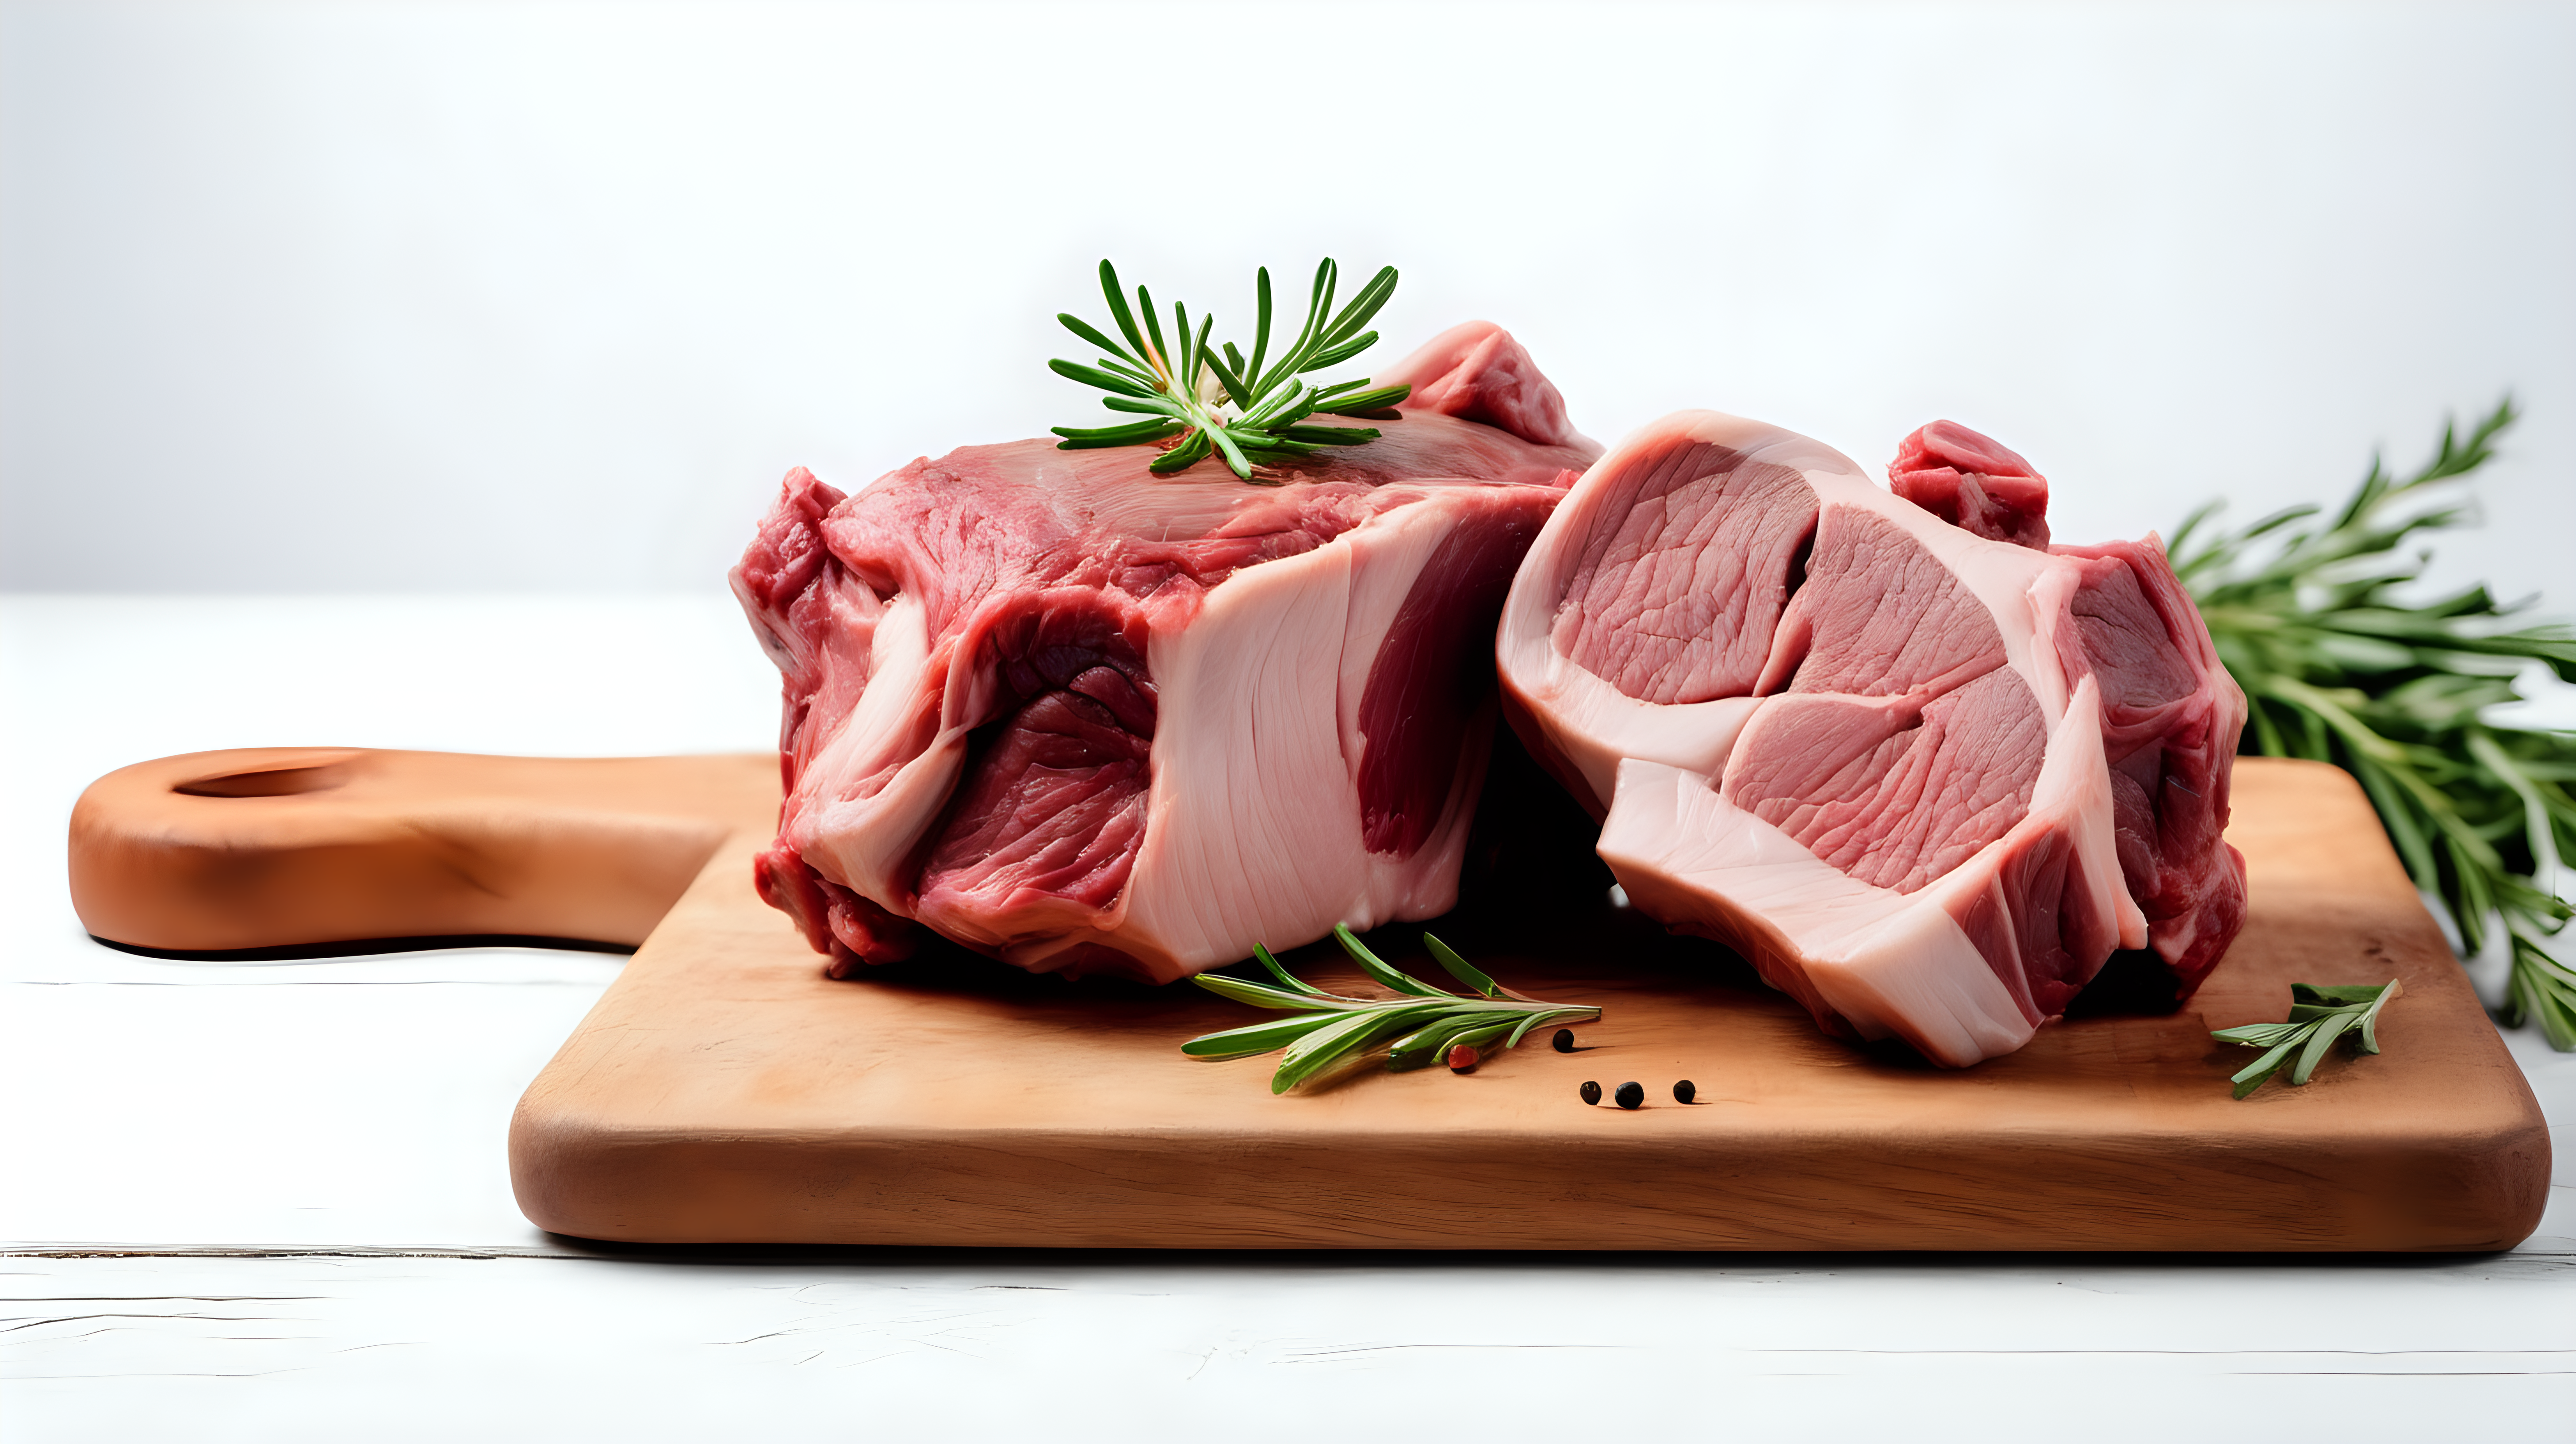 Thigh of goat meat on a wooden table, isolated on white background, copy space, photo shoot